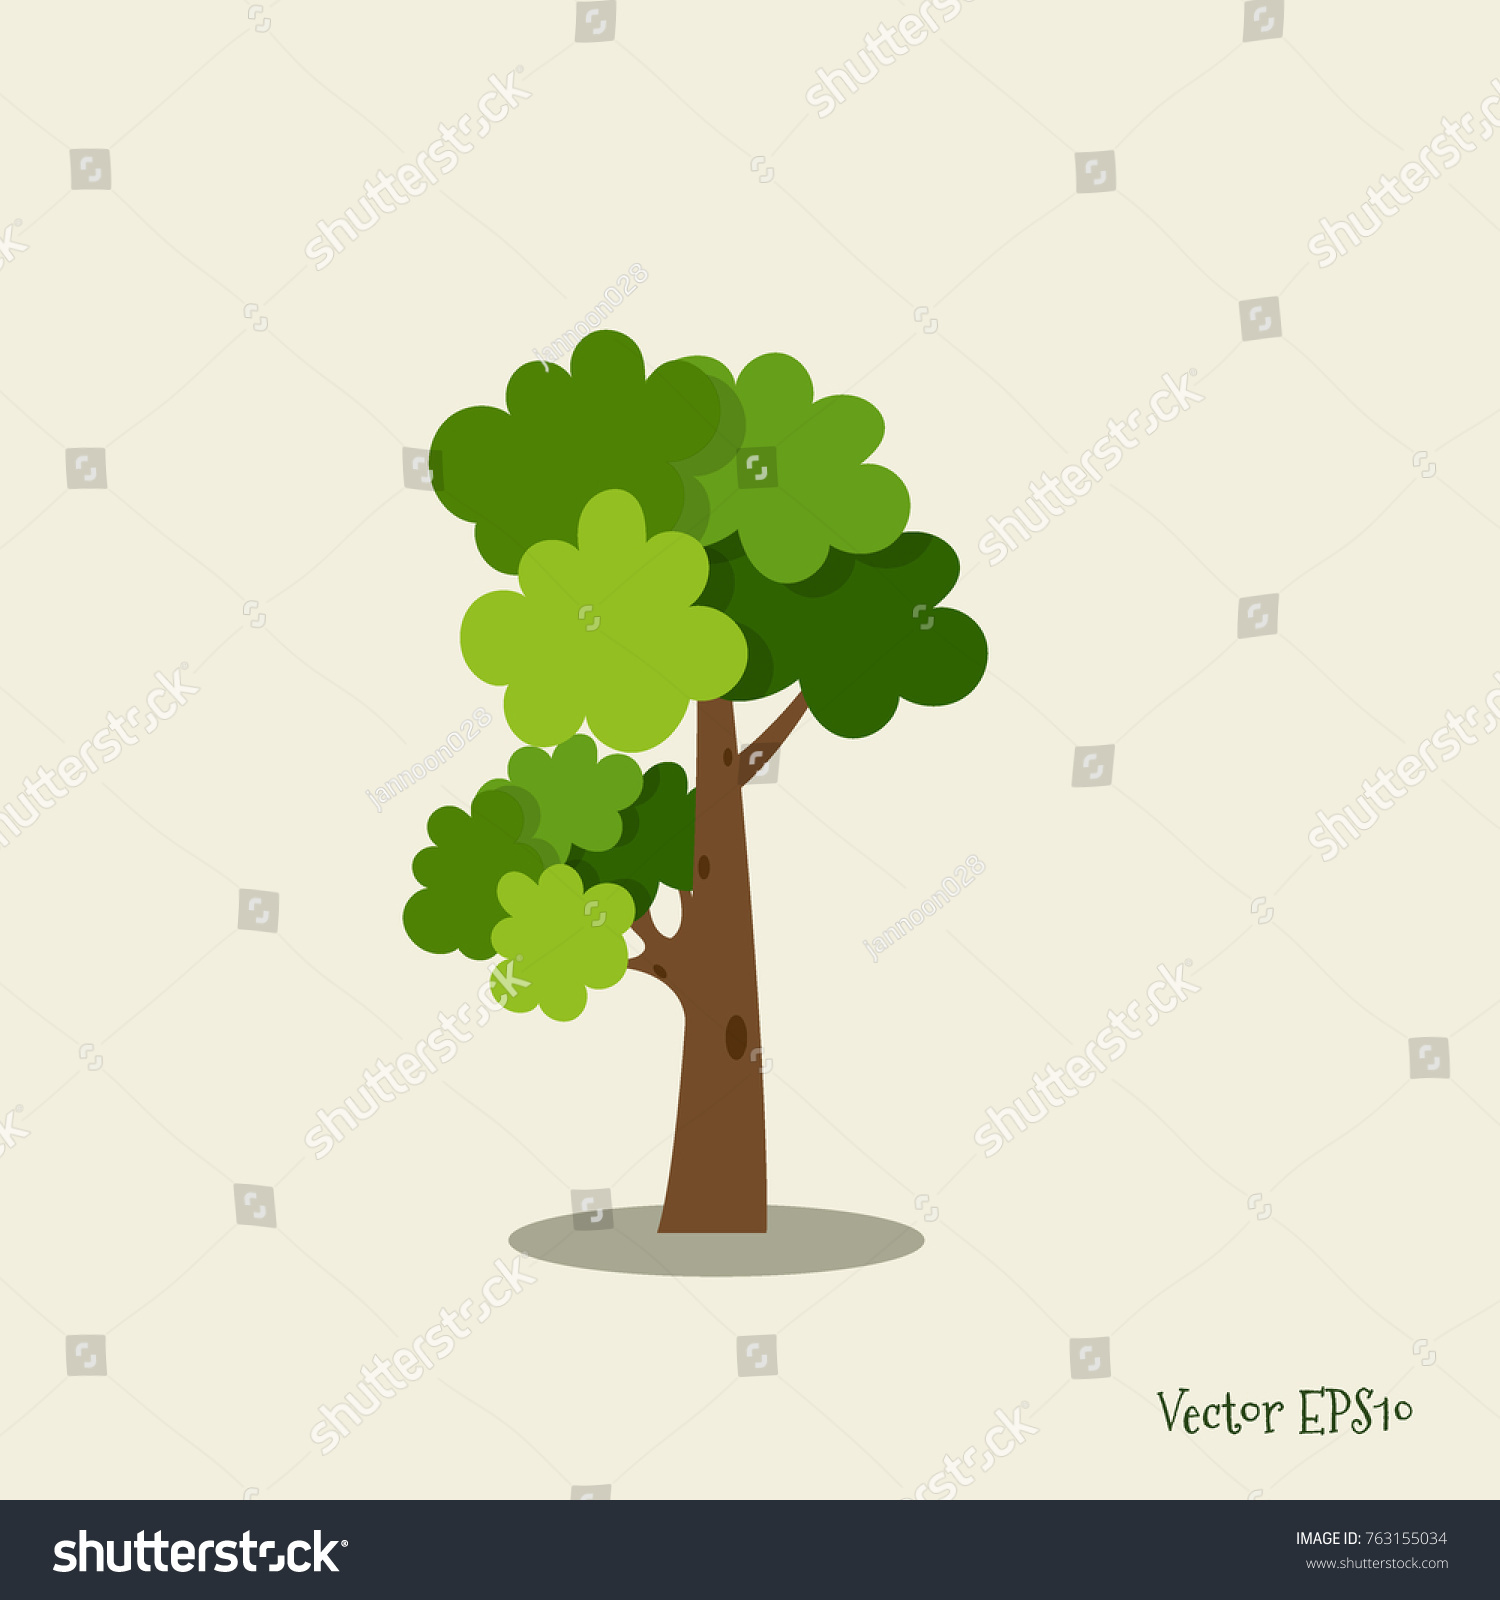 Abstract Stylized Tree Vector Illustration Stock Vector Royalty Free 763155034 Shutterstock